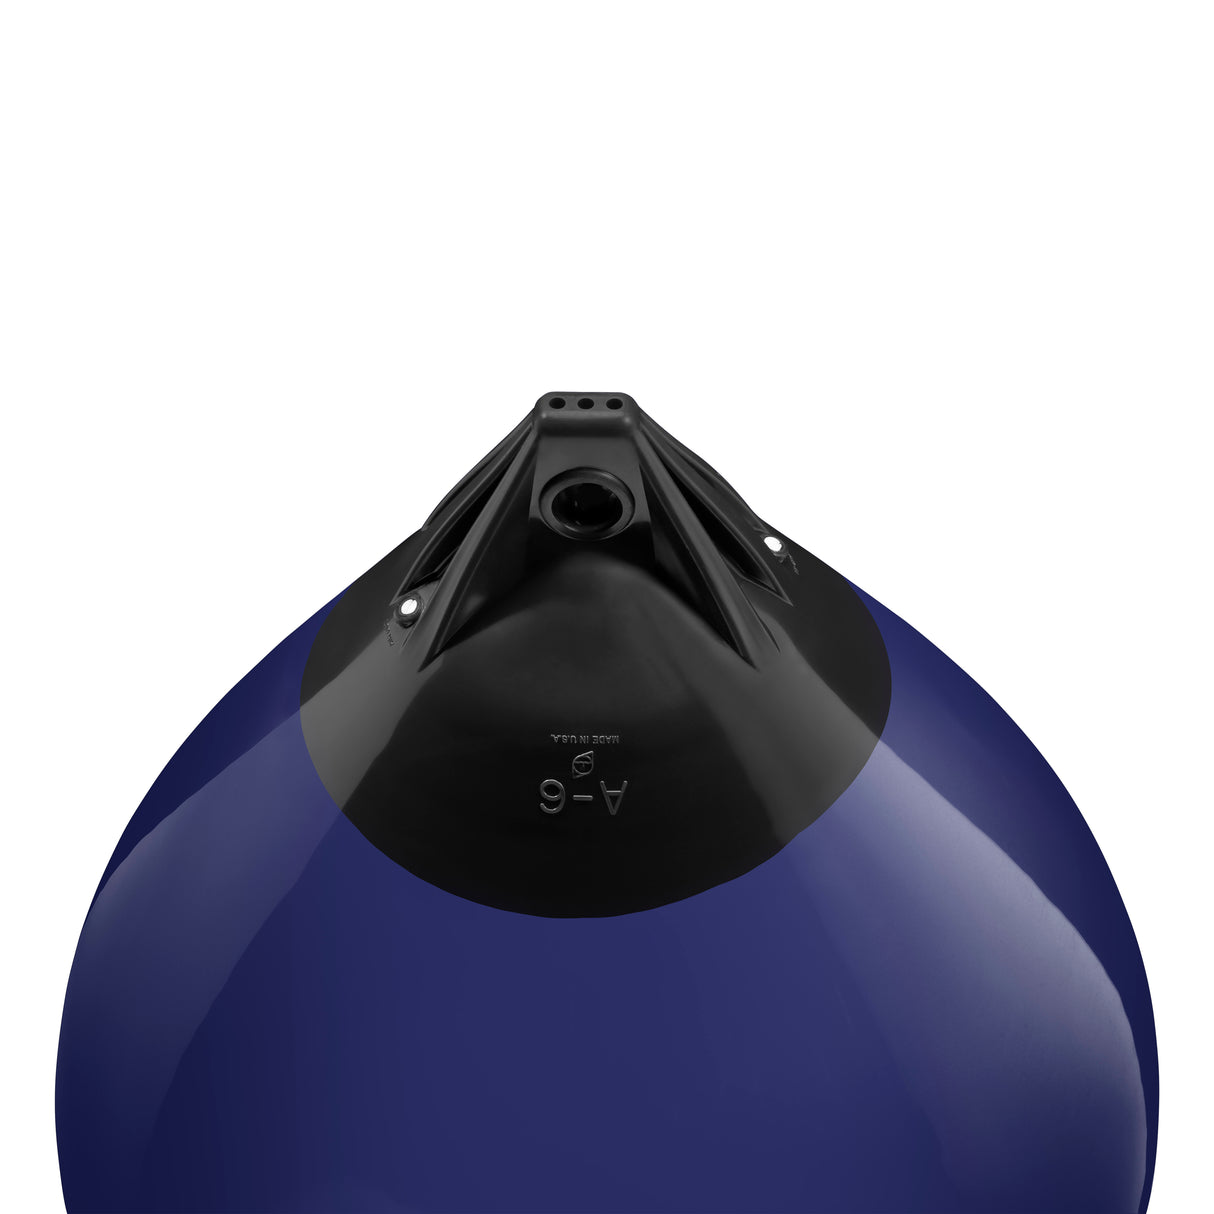 Navy Blue buoy with Black-Top, Polyform A-6 angled shot